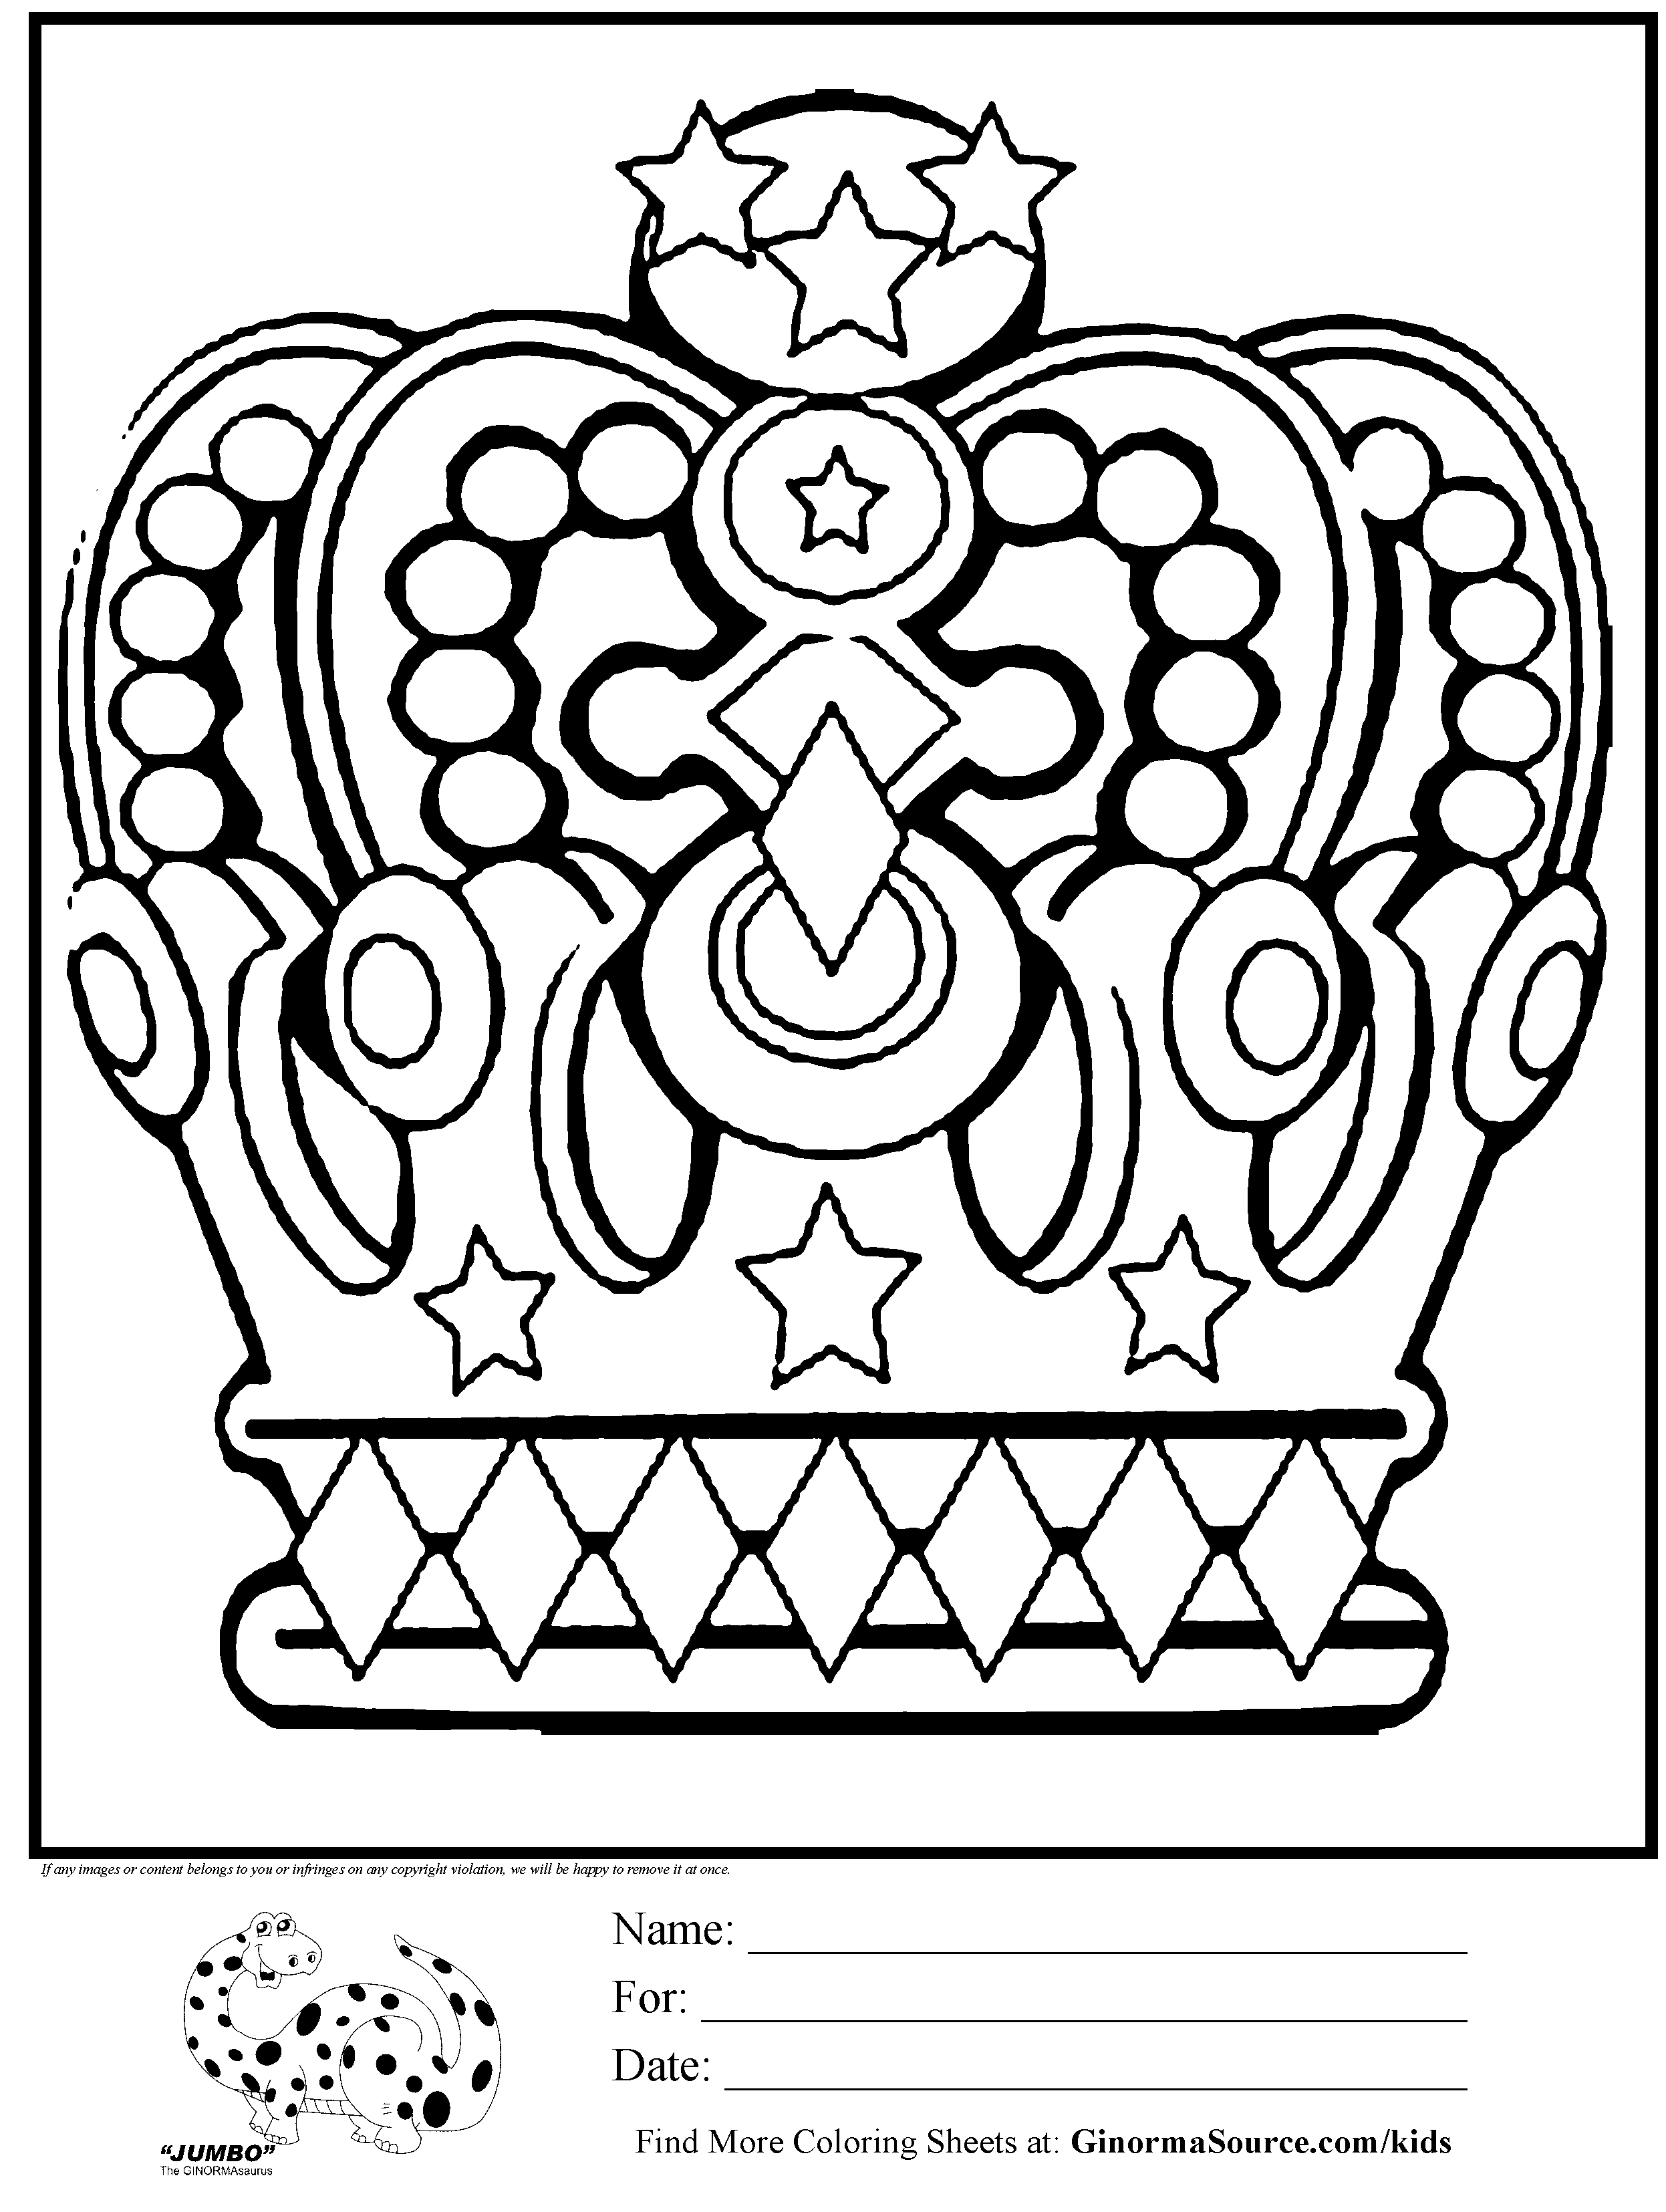 King Crowns Coloring Pages - Coloring Home